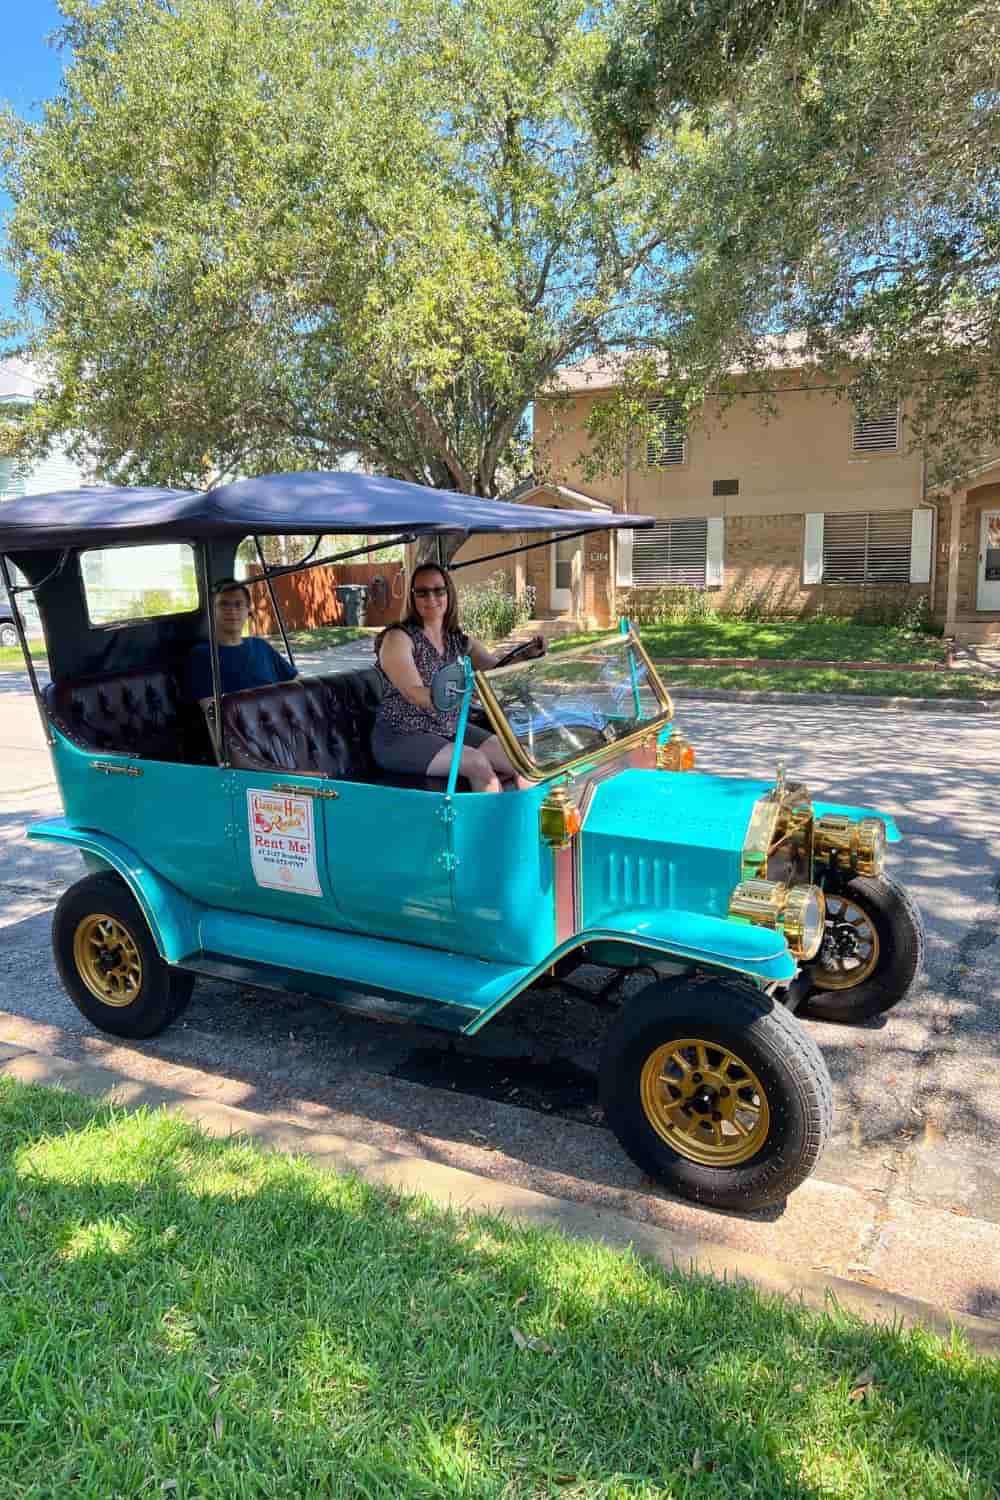 author in a turquoise model t car